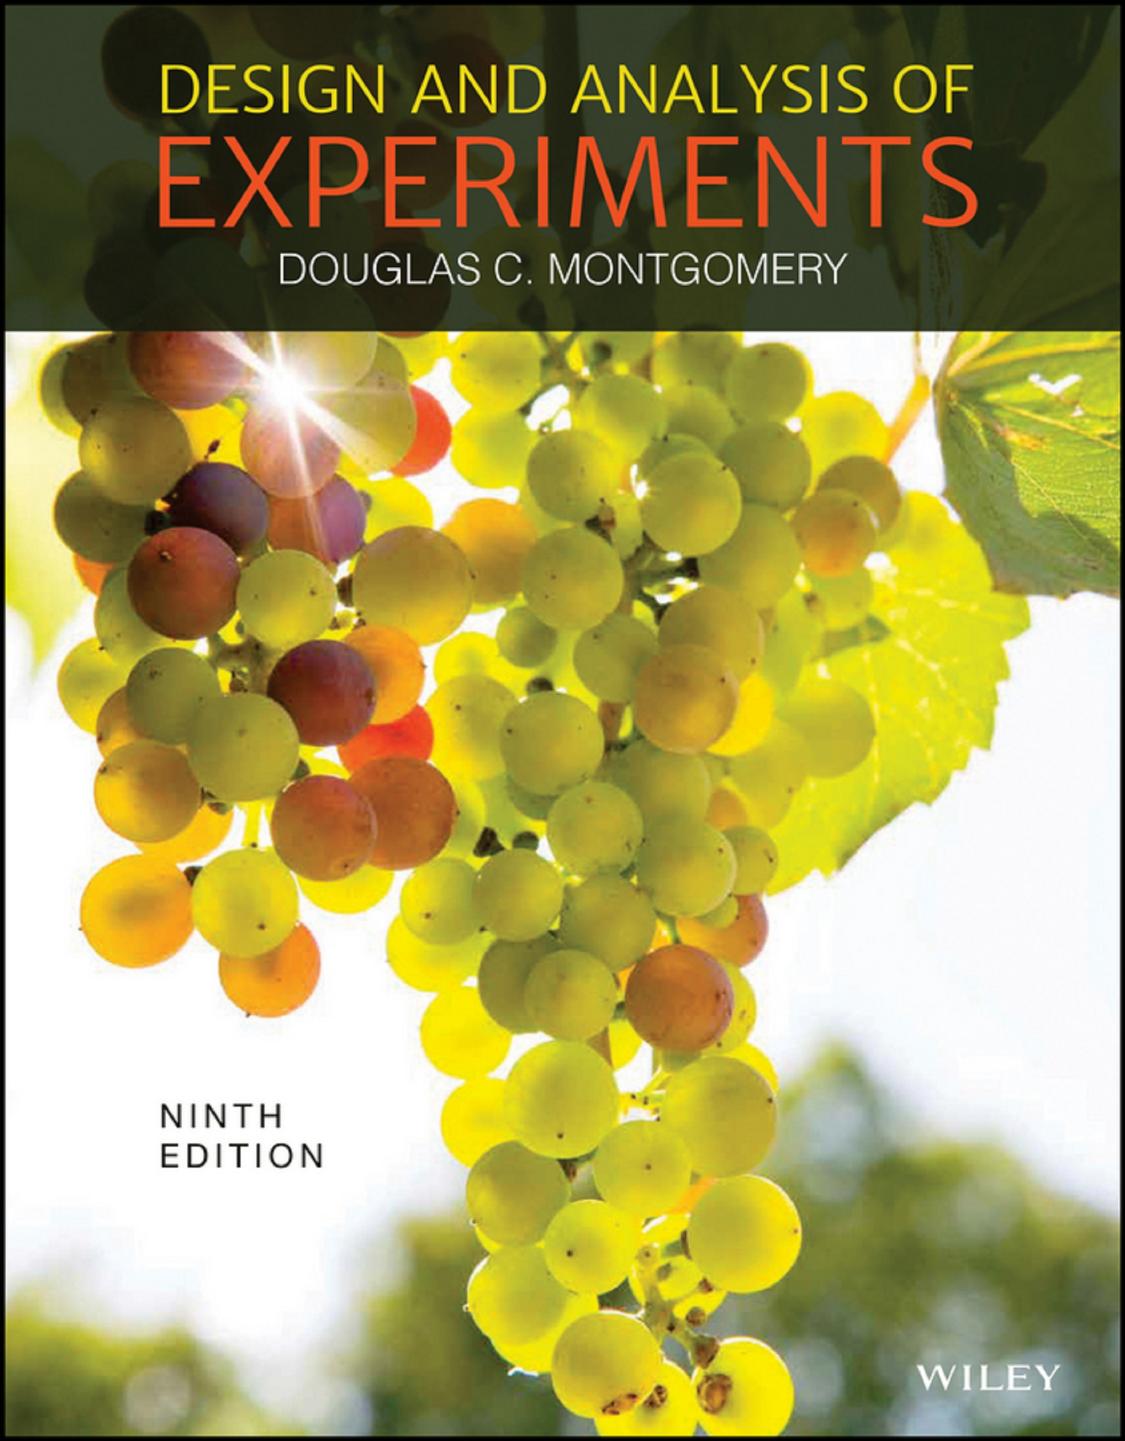 Design and Analysis of Experiments, 9th Edition 2017